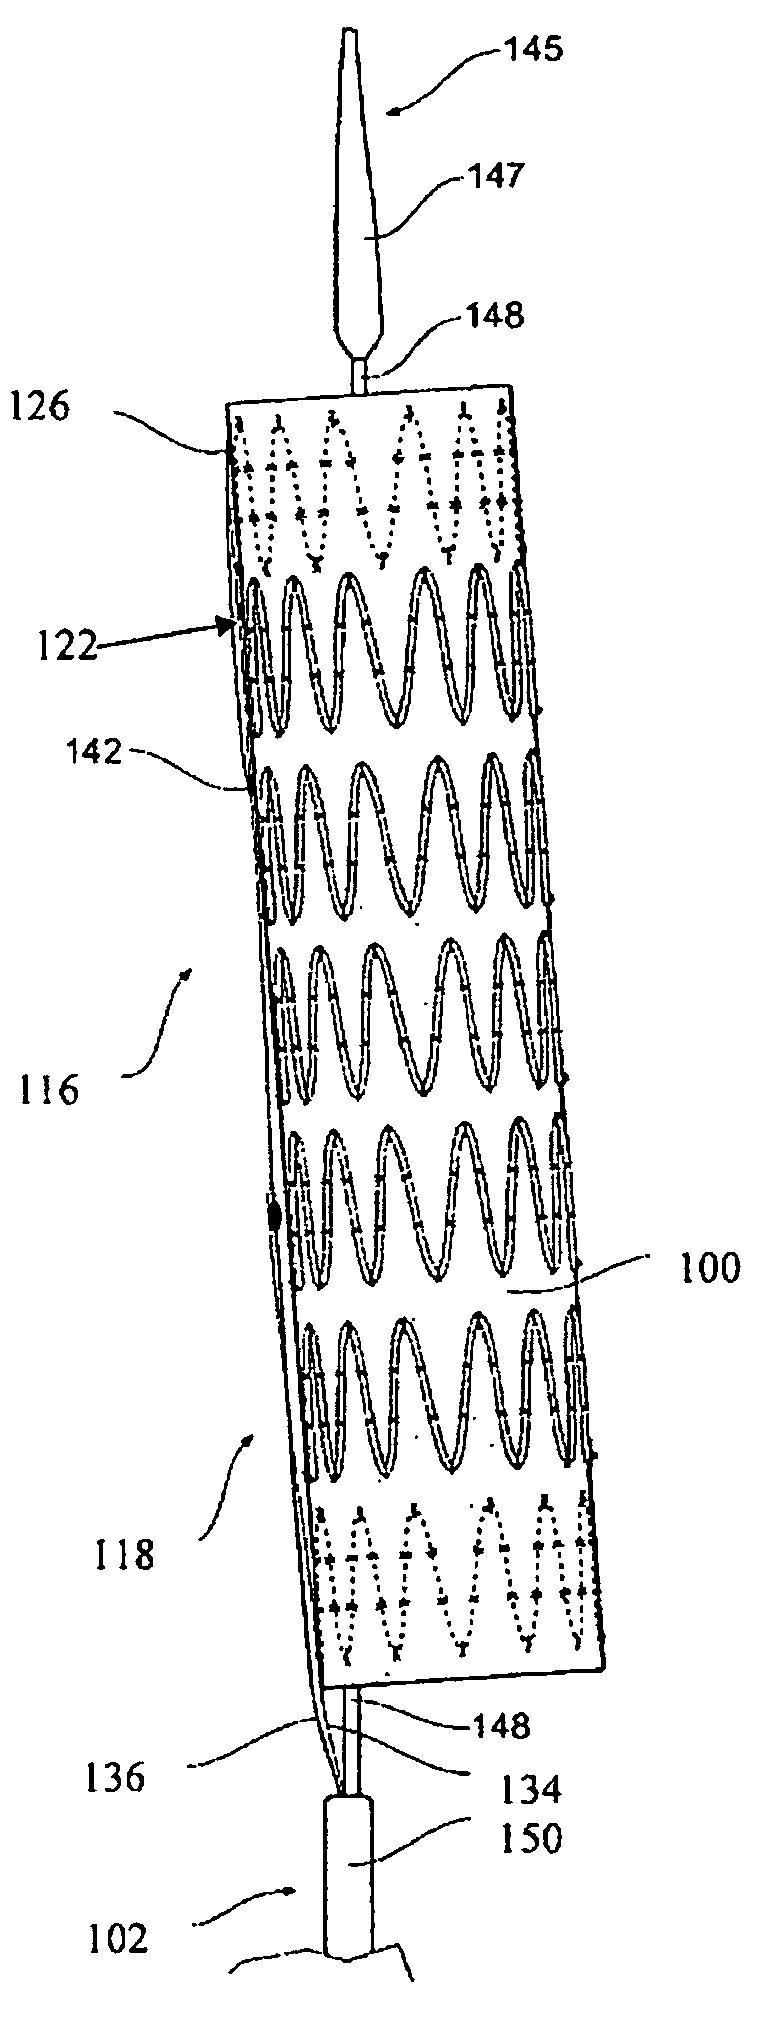 Curvable stent-graft and apparatus and fitting method